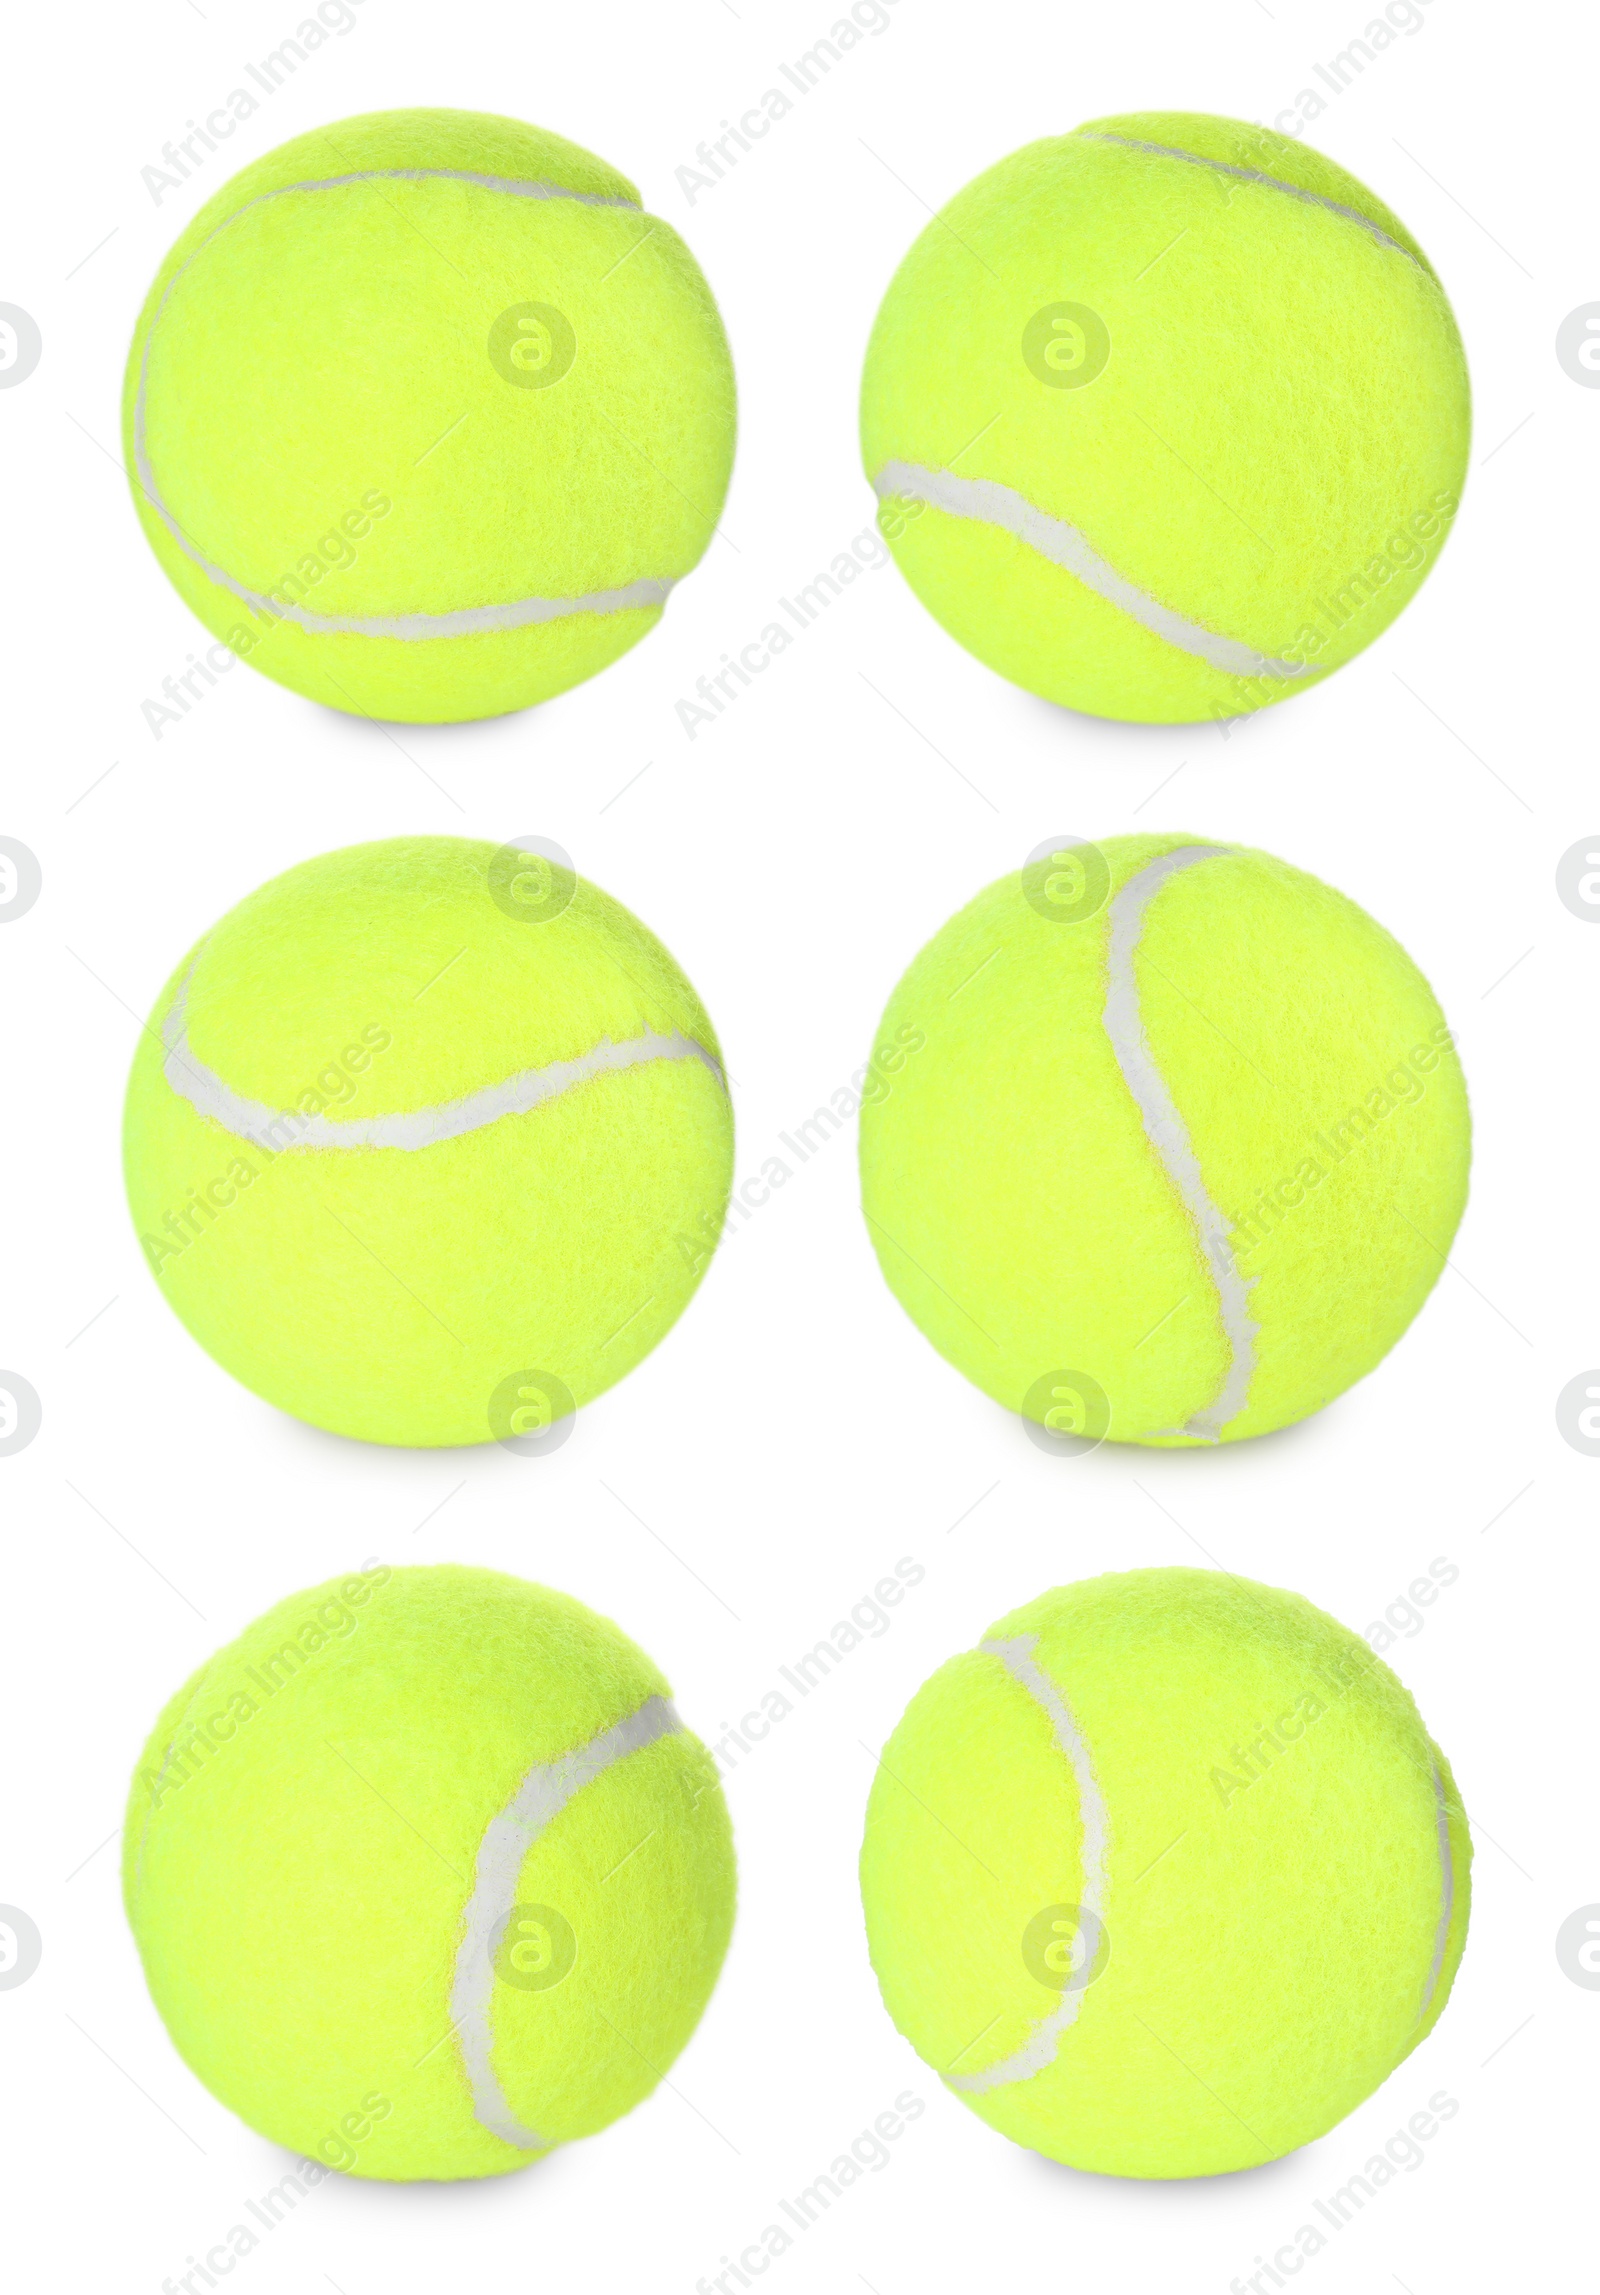 Image of Tennis ball isolated on white, different sides